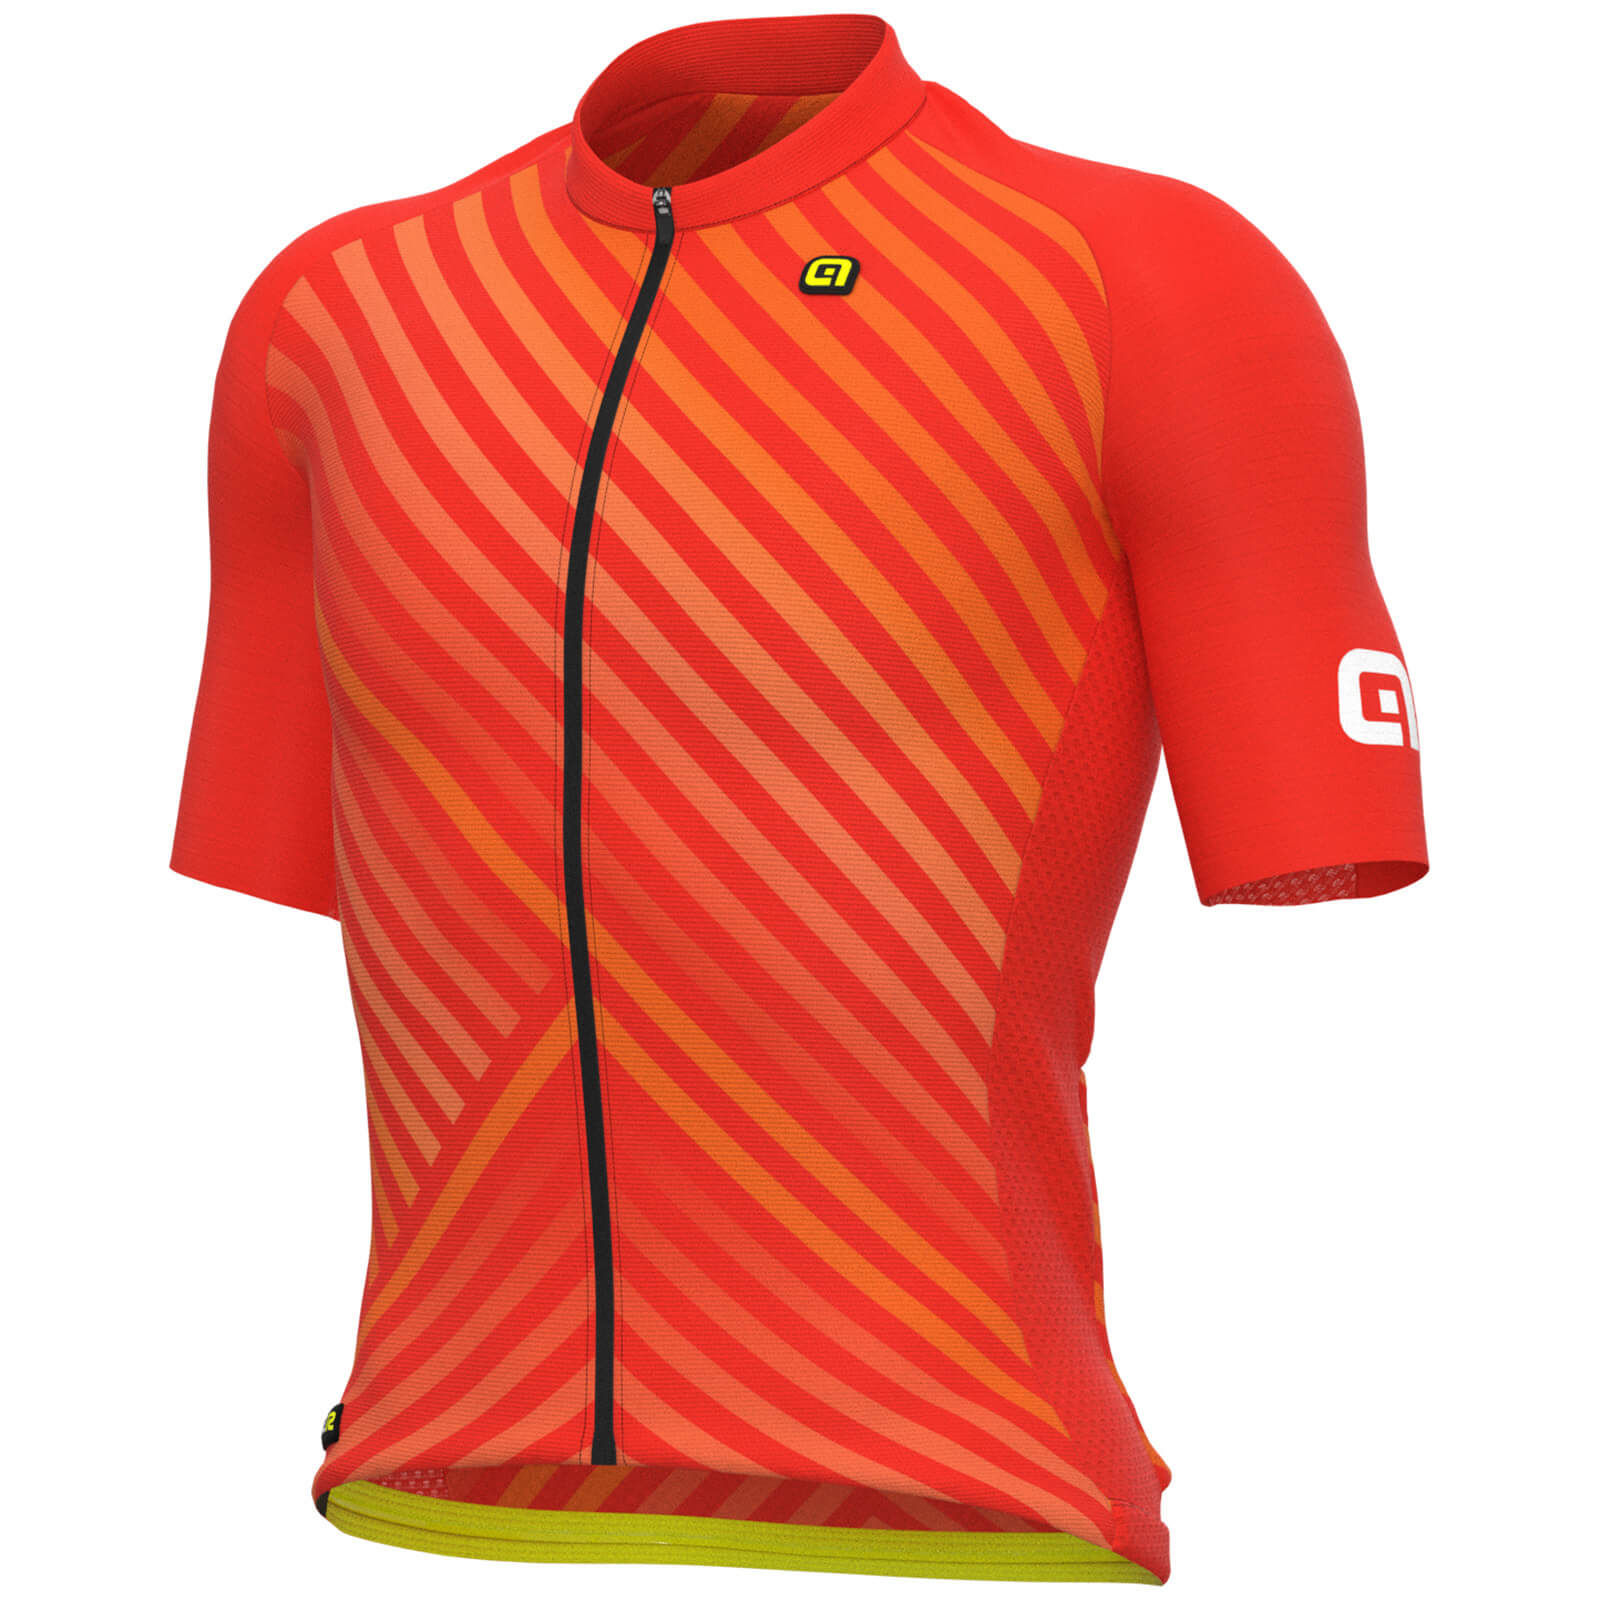 Ale PR-R Fast Short Sleeve Jersey - S - Red